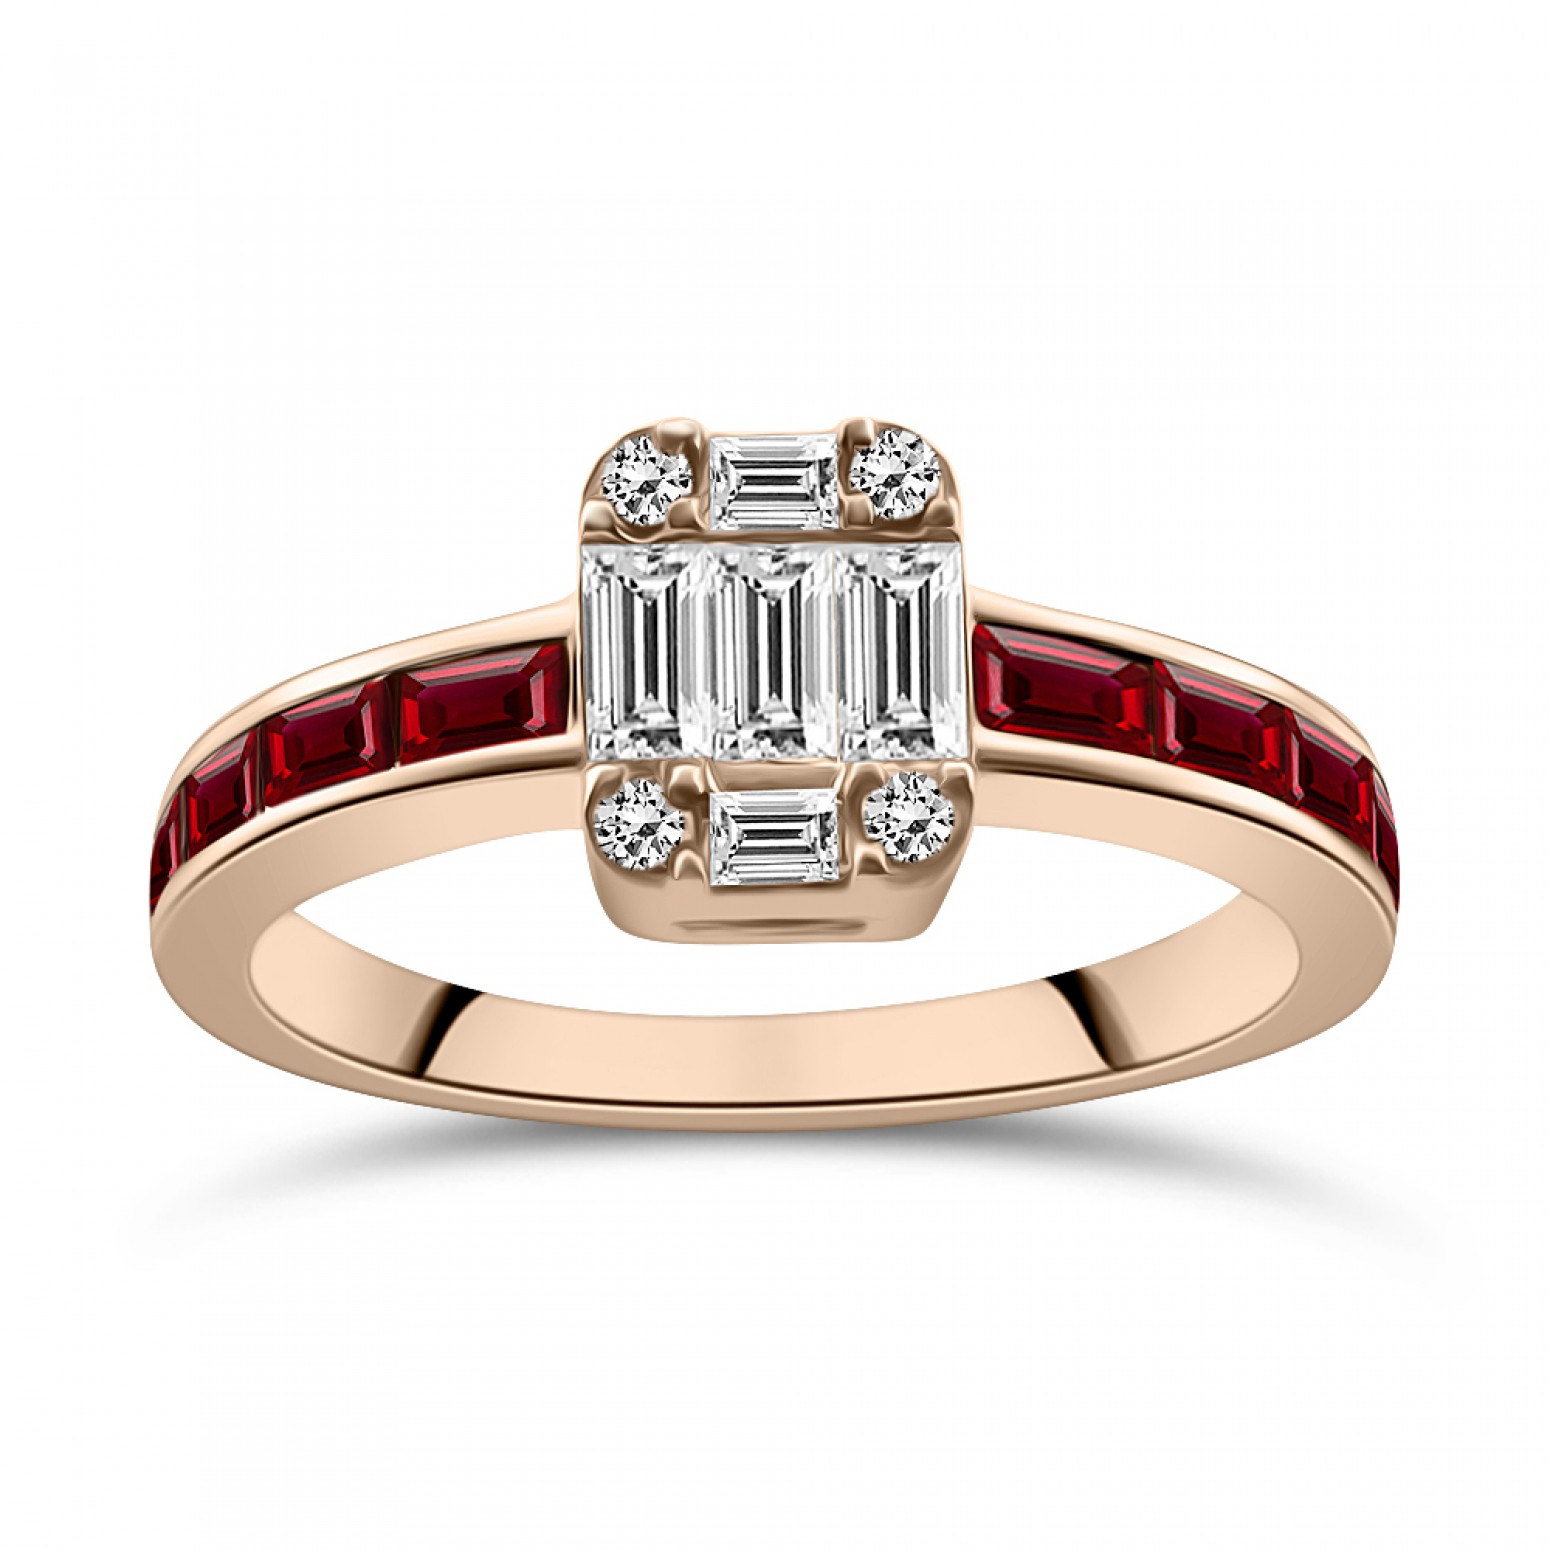 Solitaire ring 18K pink gold with rubies 0.76ct and diamonds 0.30ct VVS1, F da4205 ENGAGEMENT RINGS Κοσμηματα - chrilia.gr